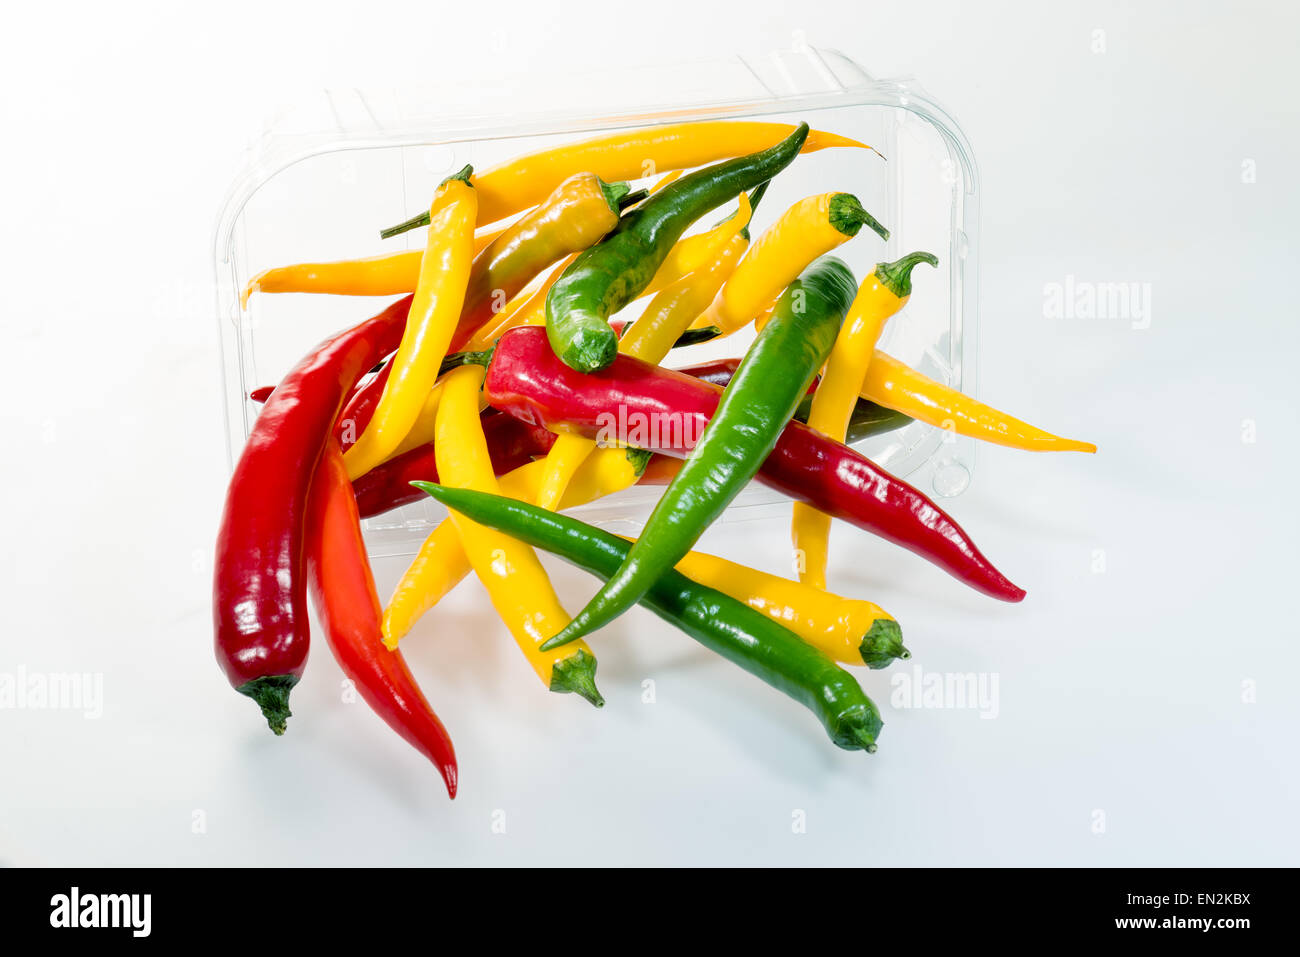 Pepperoni peppers chili wrapped selling pack in plastic hygienic problematic environmental pollution convenient to handle, cost- Stock Photo